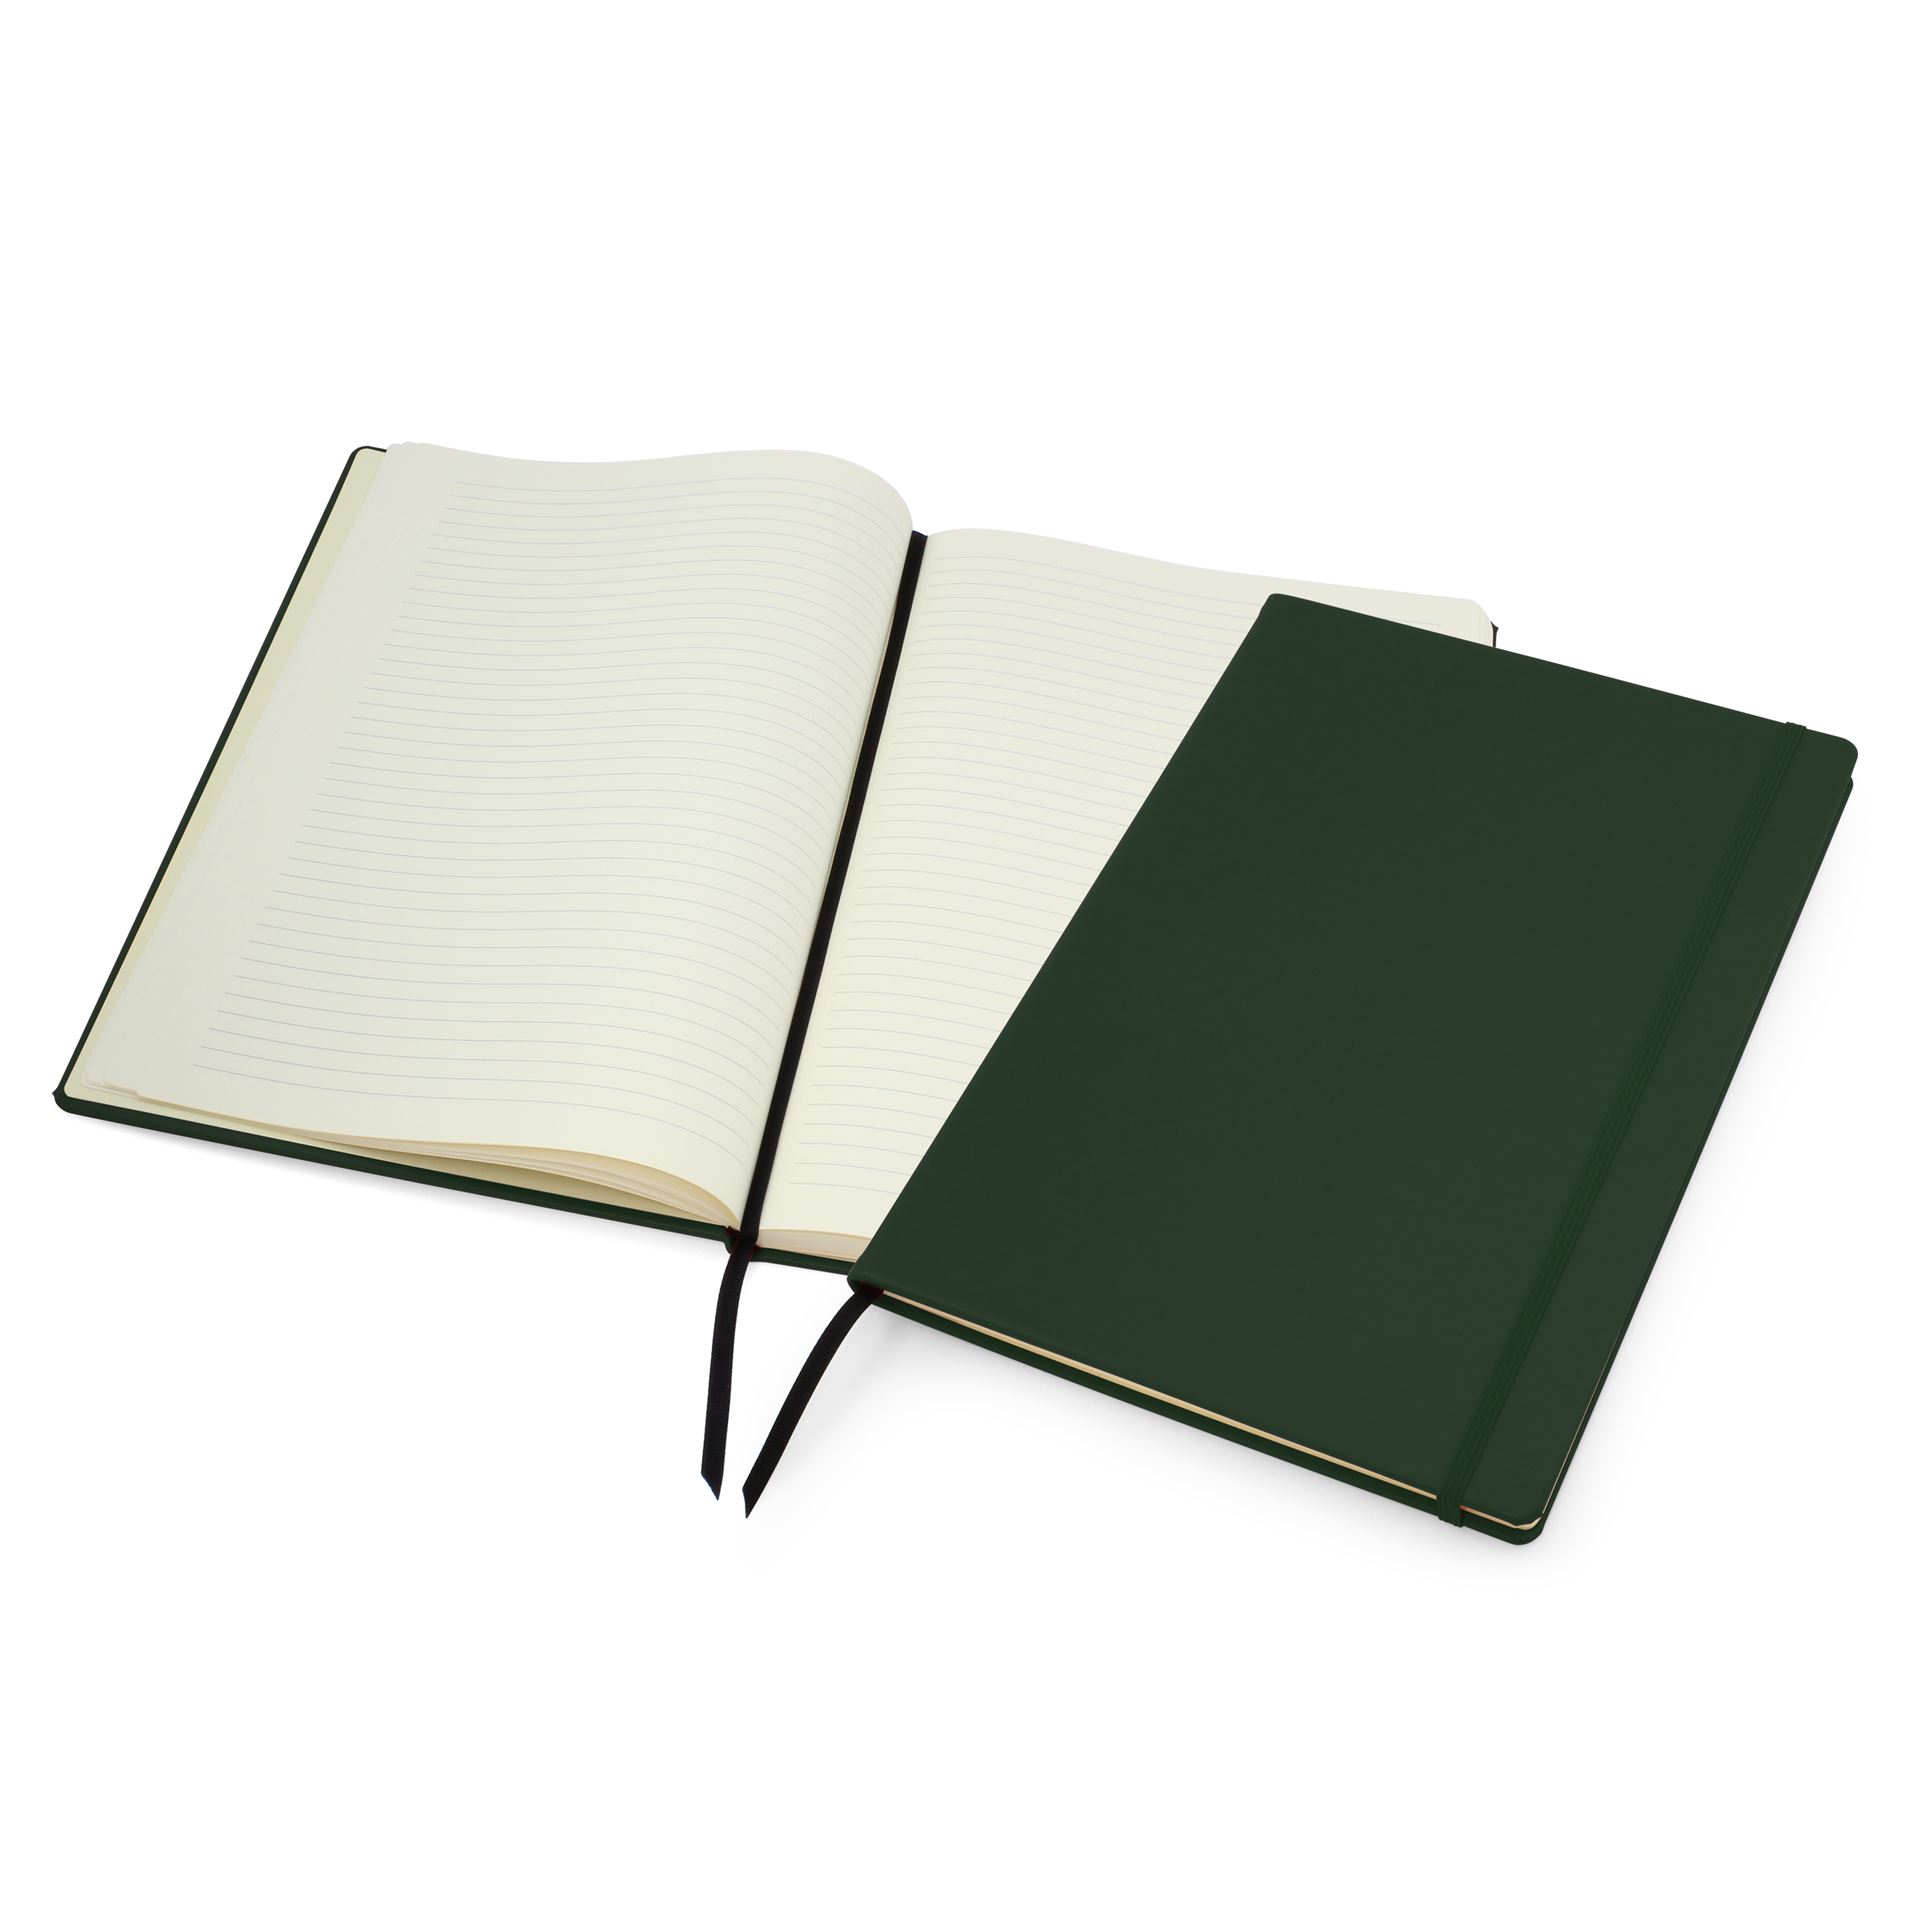 Mix & Match A4 Belluno Casebound Notebook in thousands of colour combinations.